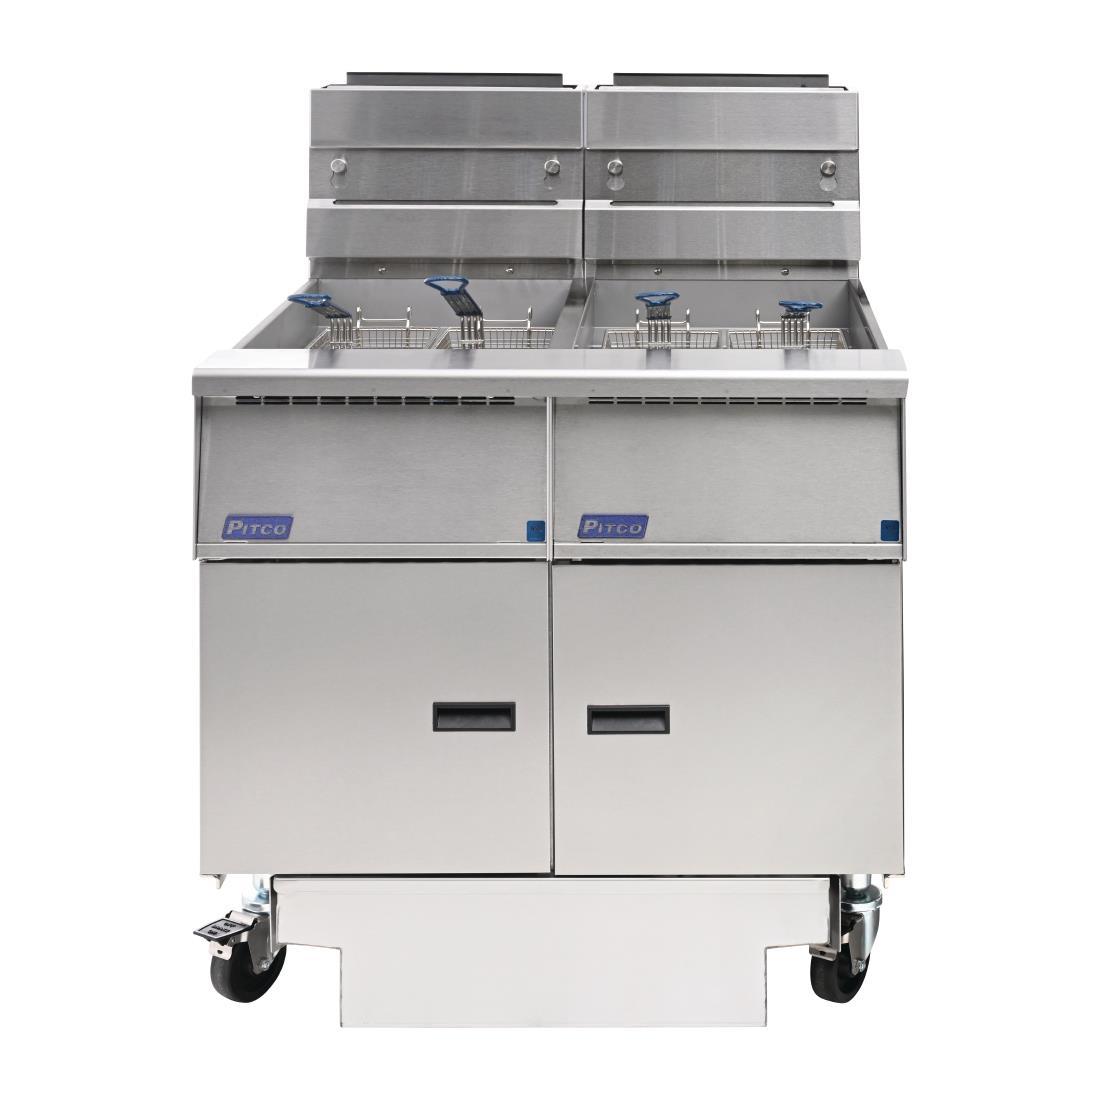 Pitco Twin Tank Solstice LPG Fryer with Filter Drawer SG14RS/FD-FF - FS128-P  - 4